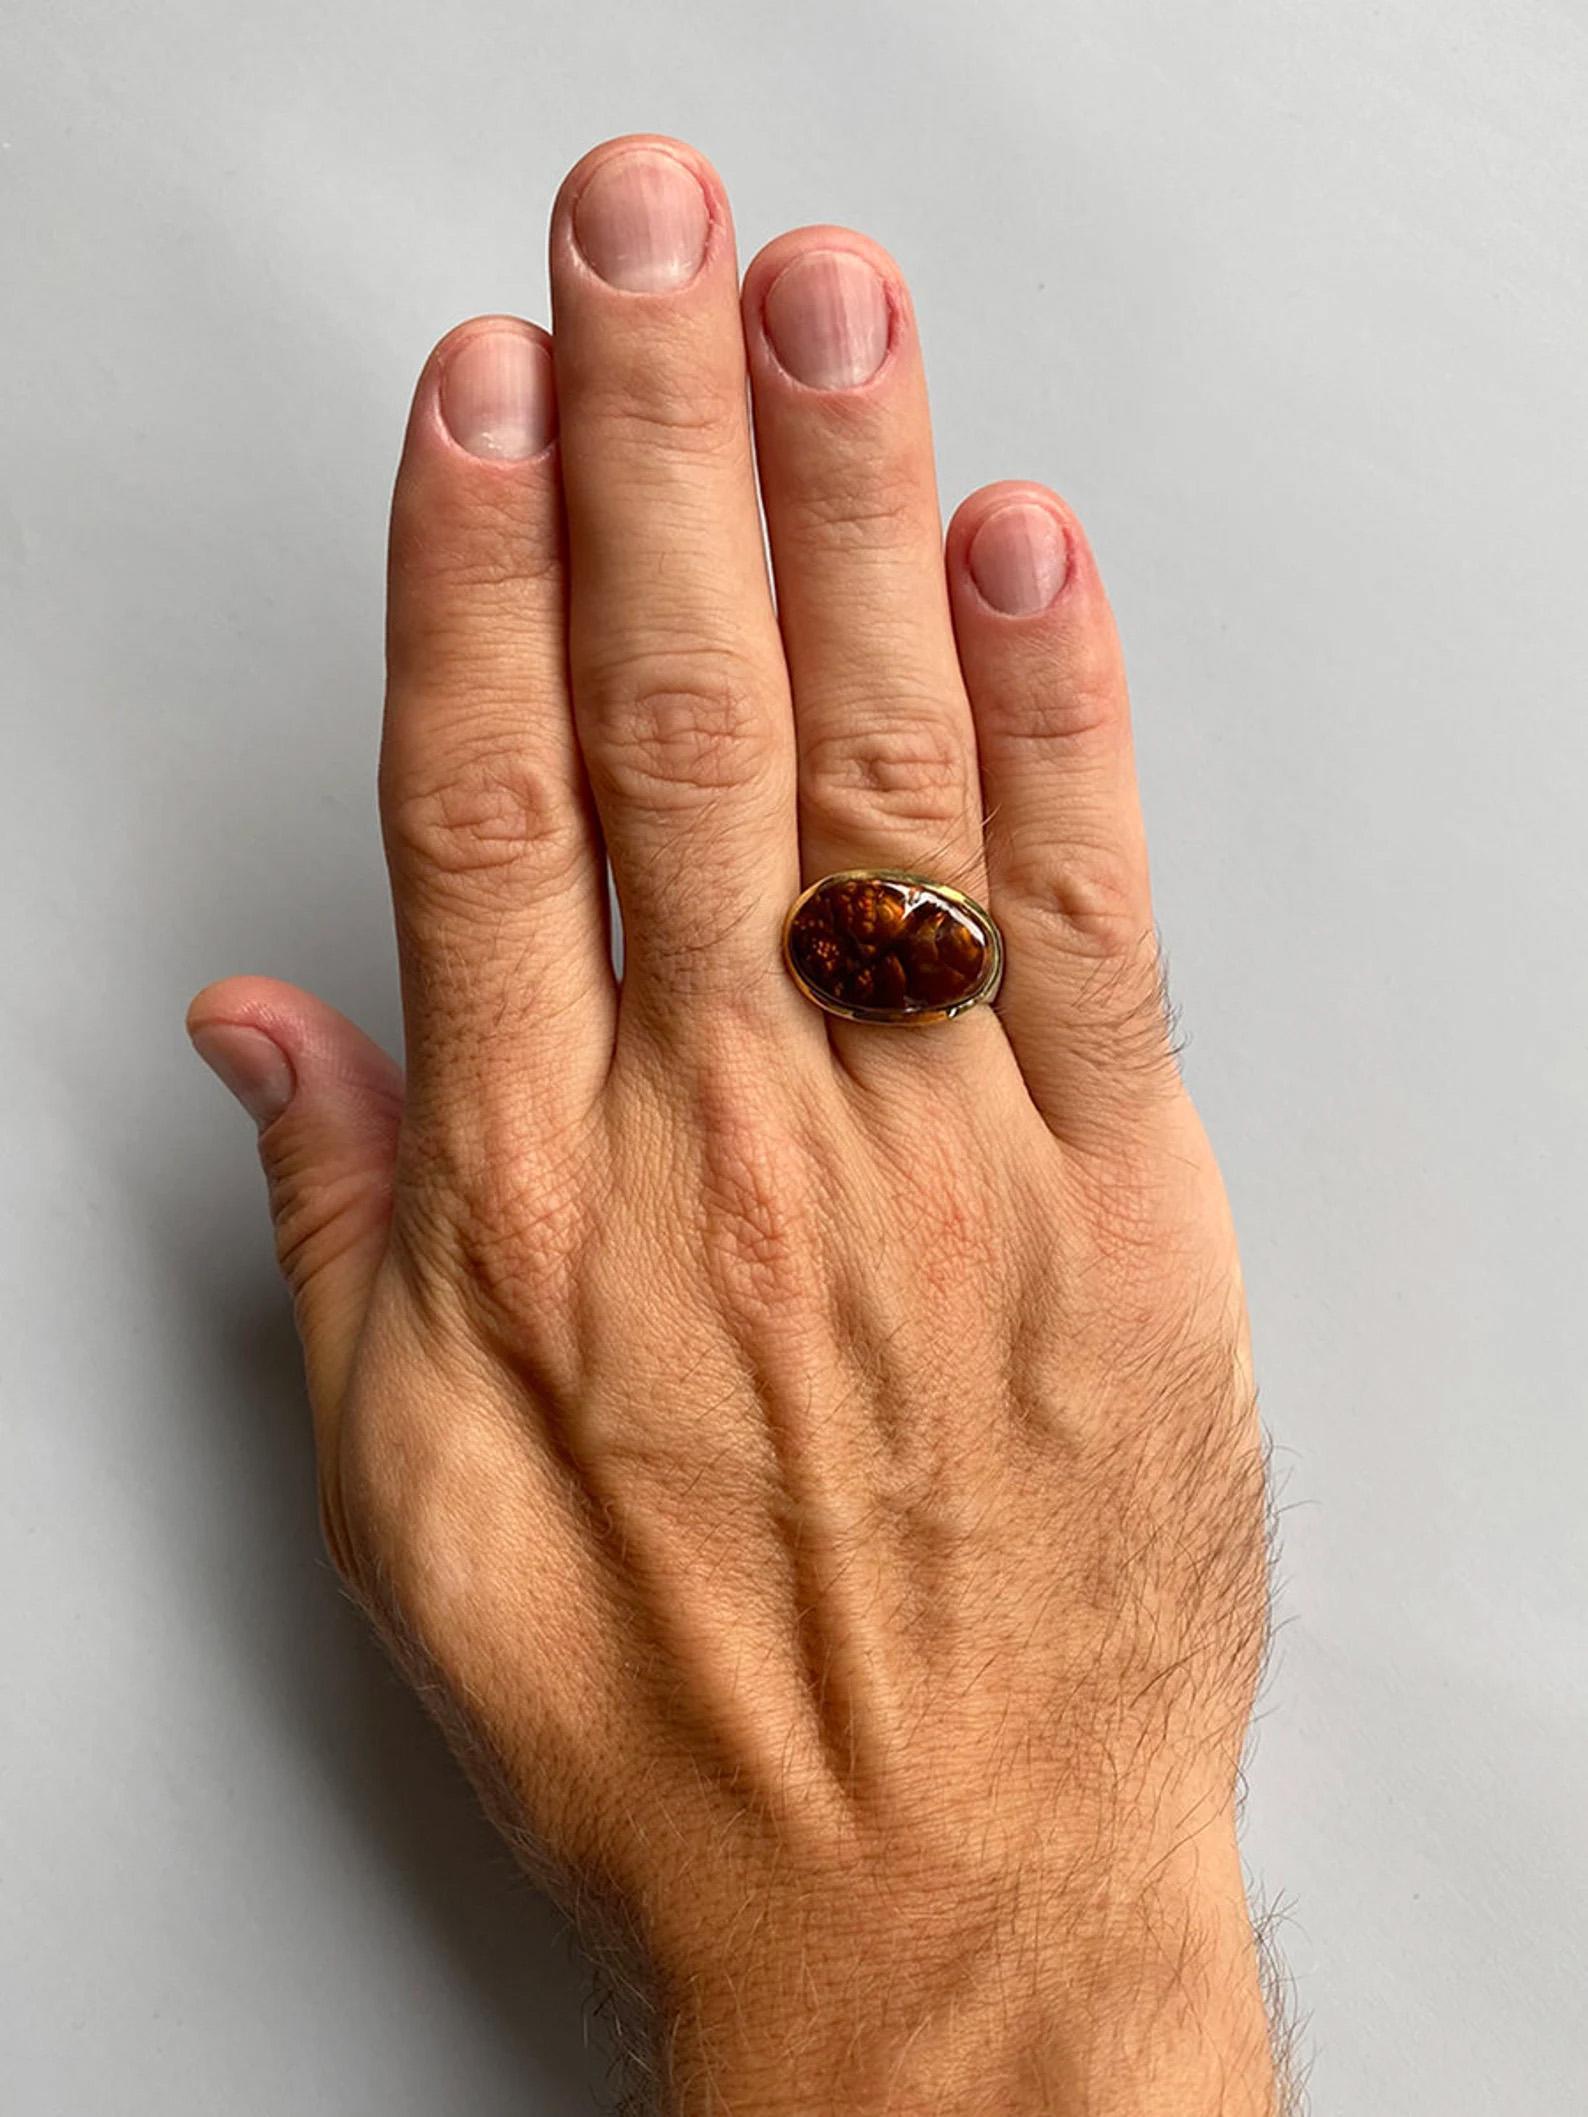 Fire Agate Scratched Silver Ring Natural Mexican Patterned Luminous Red Gemstone For Sale 3